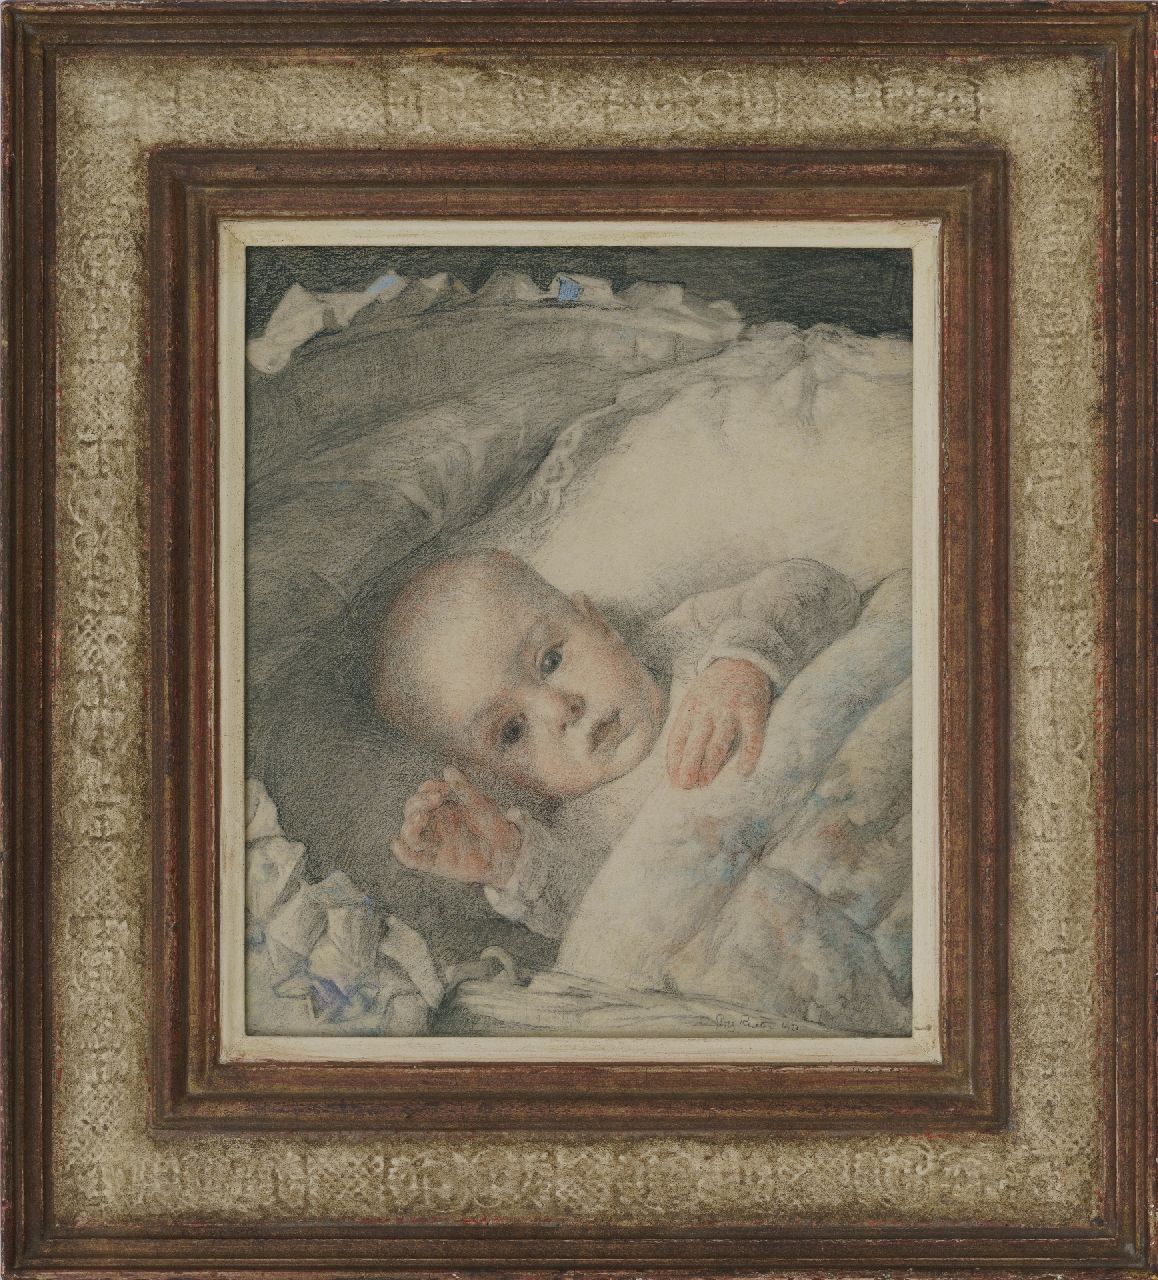 Rueter W.C.G.  | Wilhelm Christian 'Georg' Rueter | Watercolours and drawings offered for sale | A portrait of Jan Peter Moes as a baby, coloured pencil and chalk on paper 32.6 x 27.9 cm, signed l.r. and dated 1920